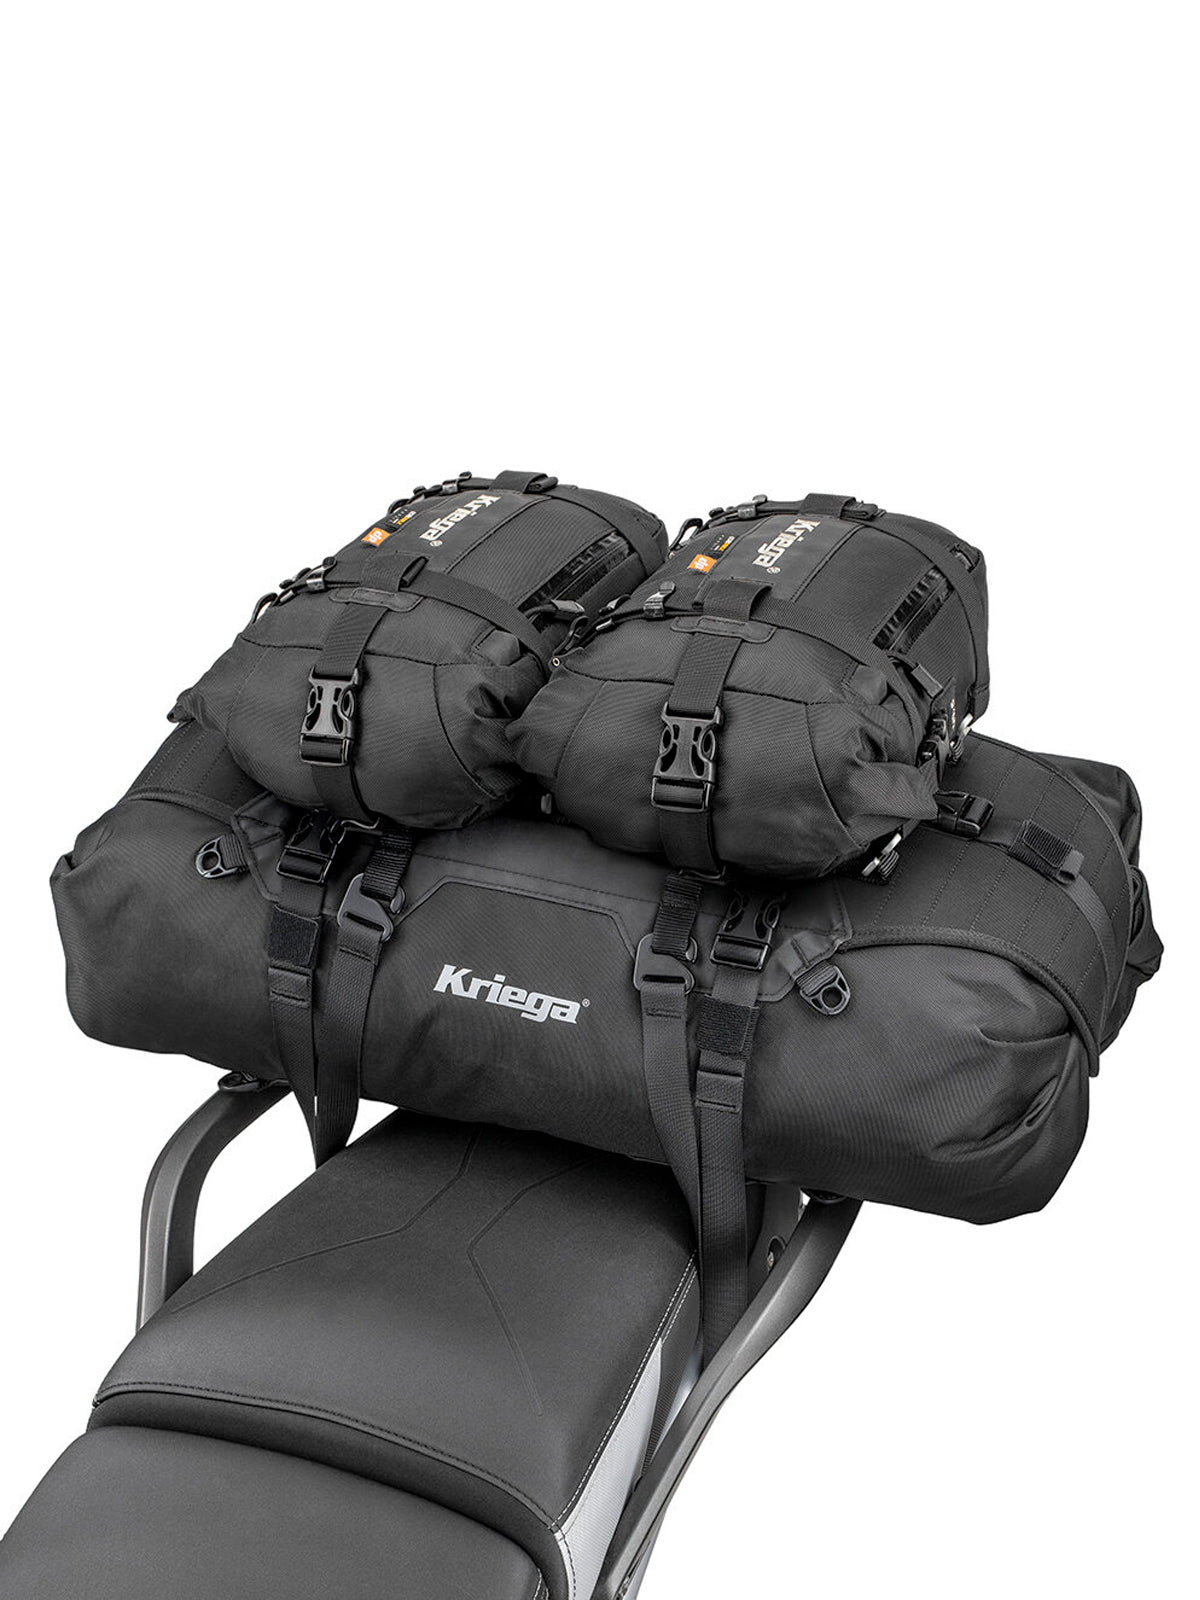 Kriega US40 Drypack Rackpack with two adventure packs attached